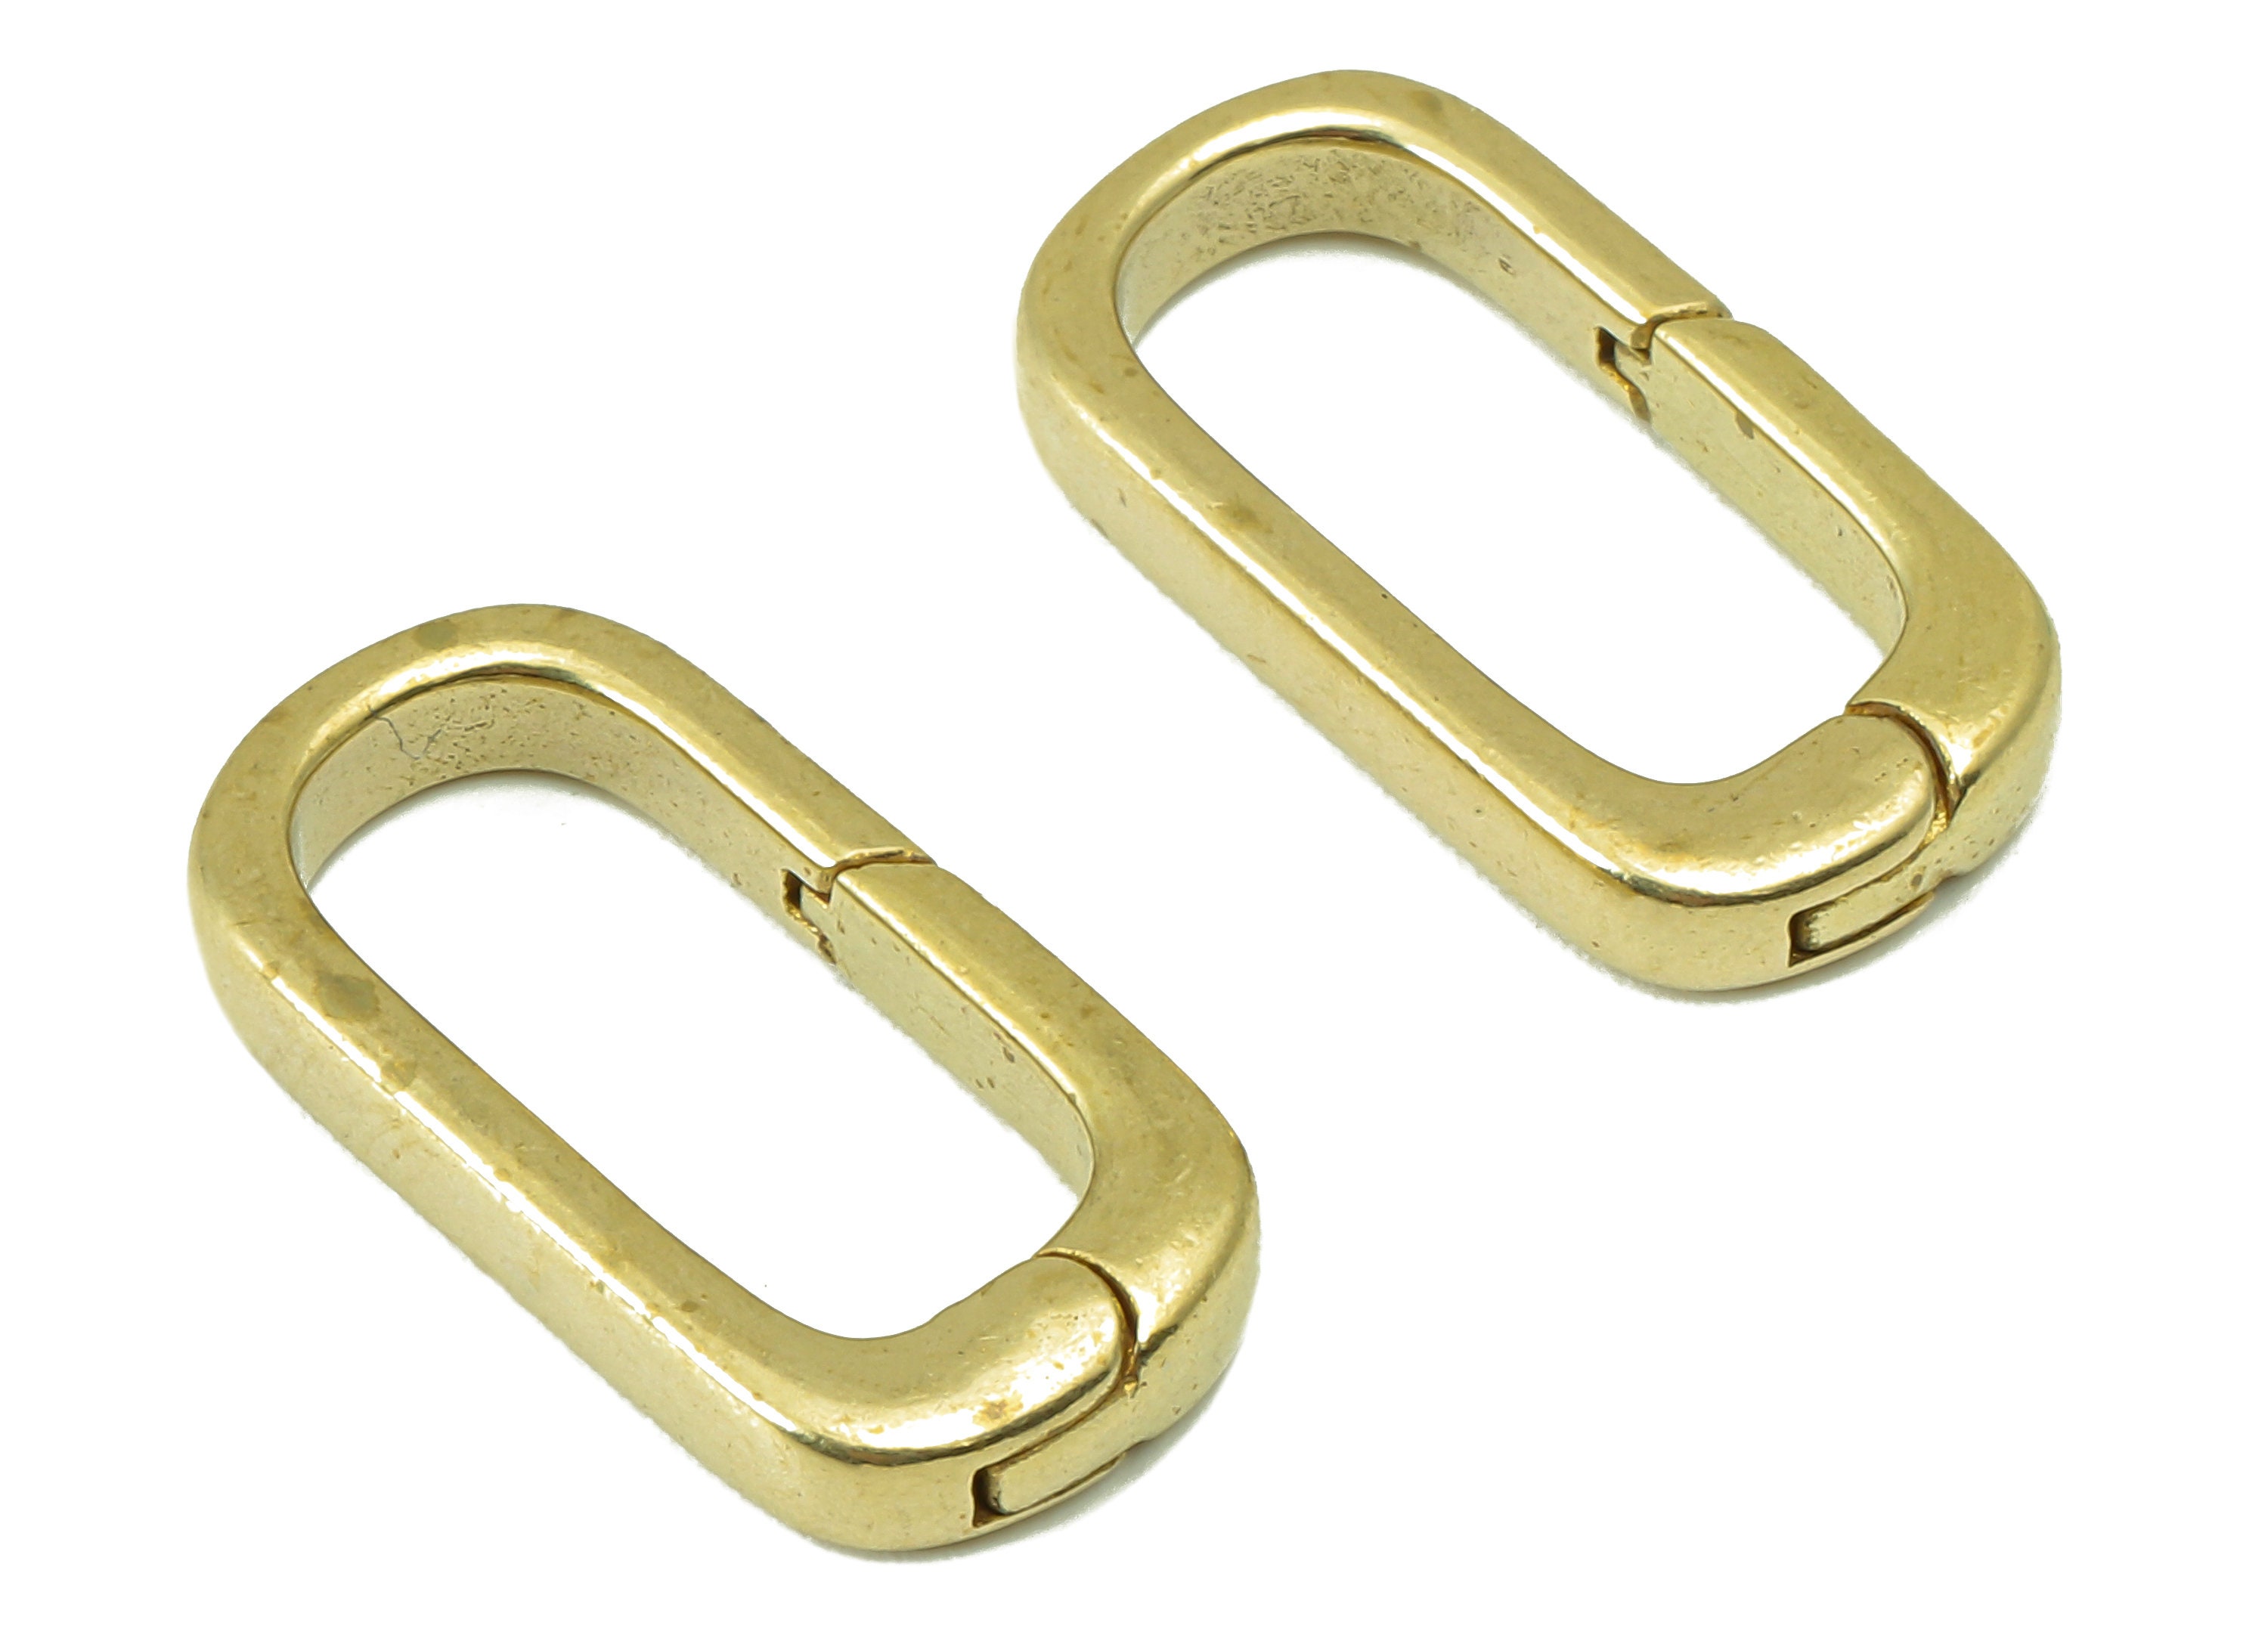 13.5mm Hammertone Maker's Clasps for Handcrafted Jewelry Making